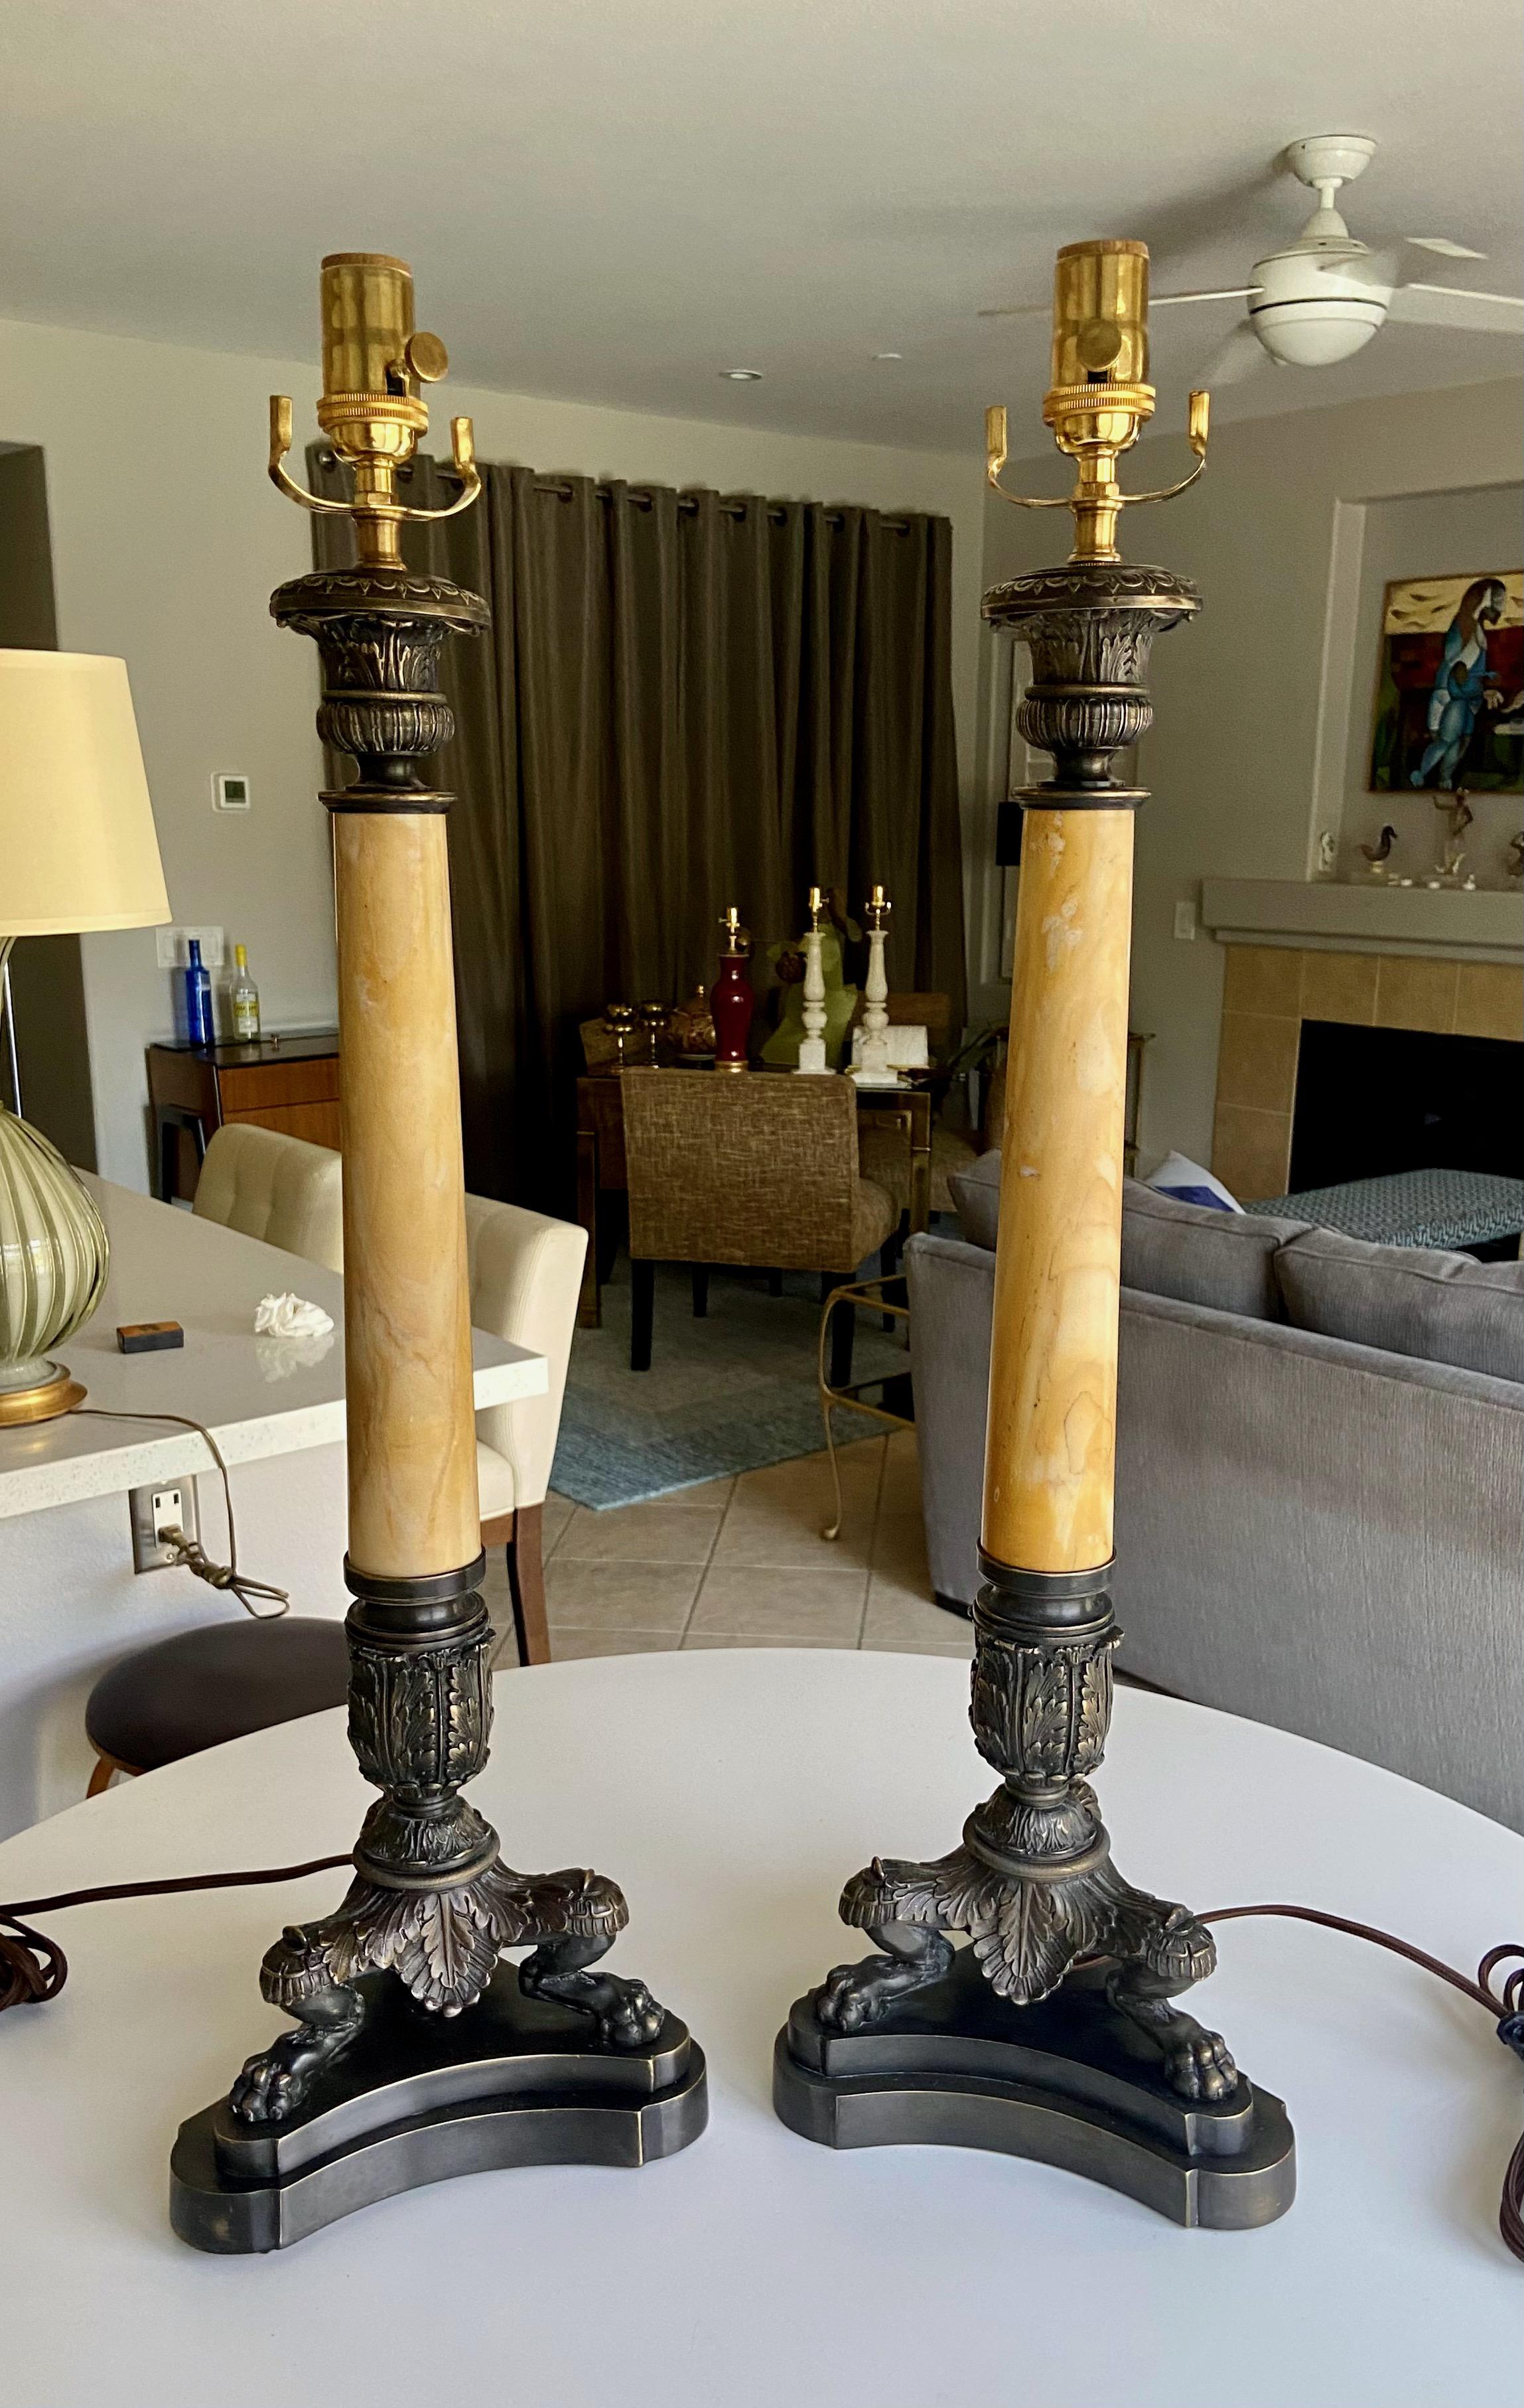 Pair of large French Empire style bronze table lamps with alabaster columns resting on lion paw feet. The color of the stone is pale amber with lots of color variation and veining. The bronze is expertly cast with fine detailing throughout. Newly